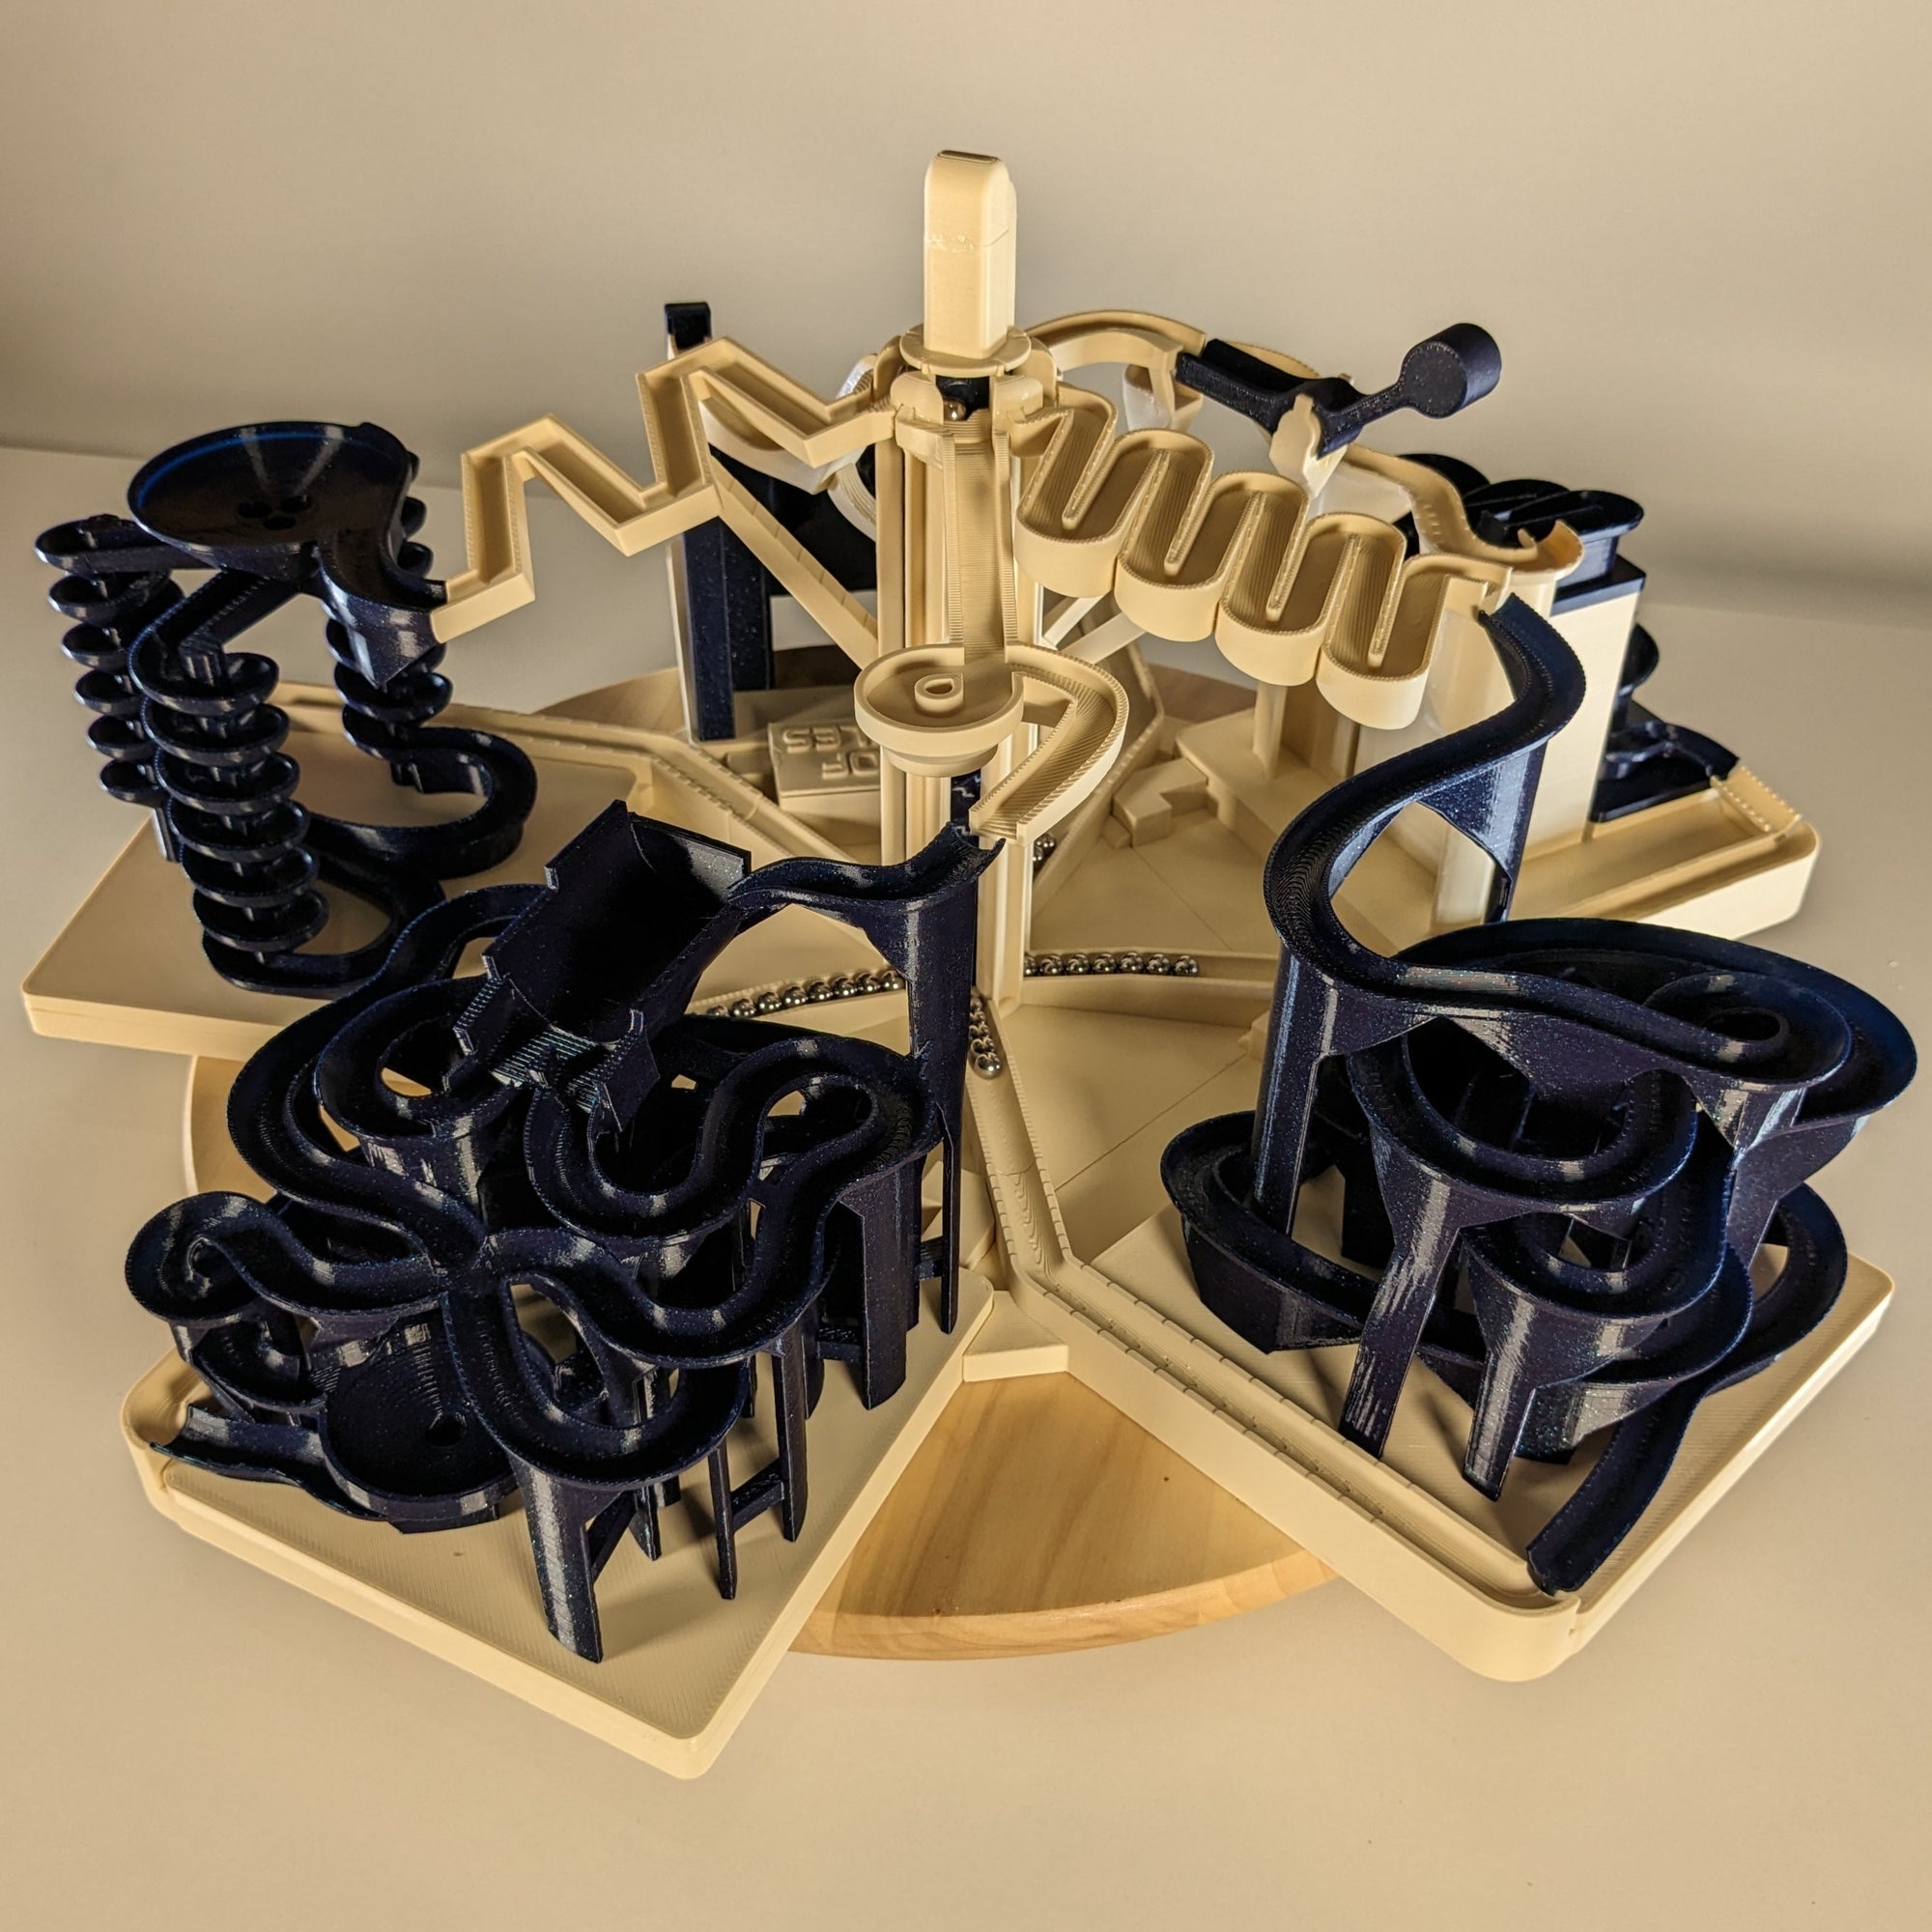 Centerpiece | Marble Machine STL - Out Of Marbles